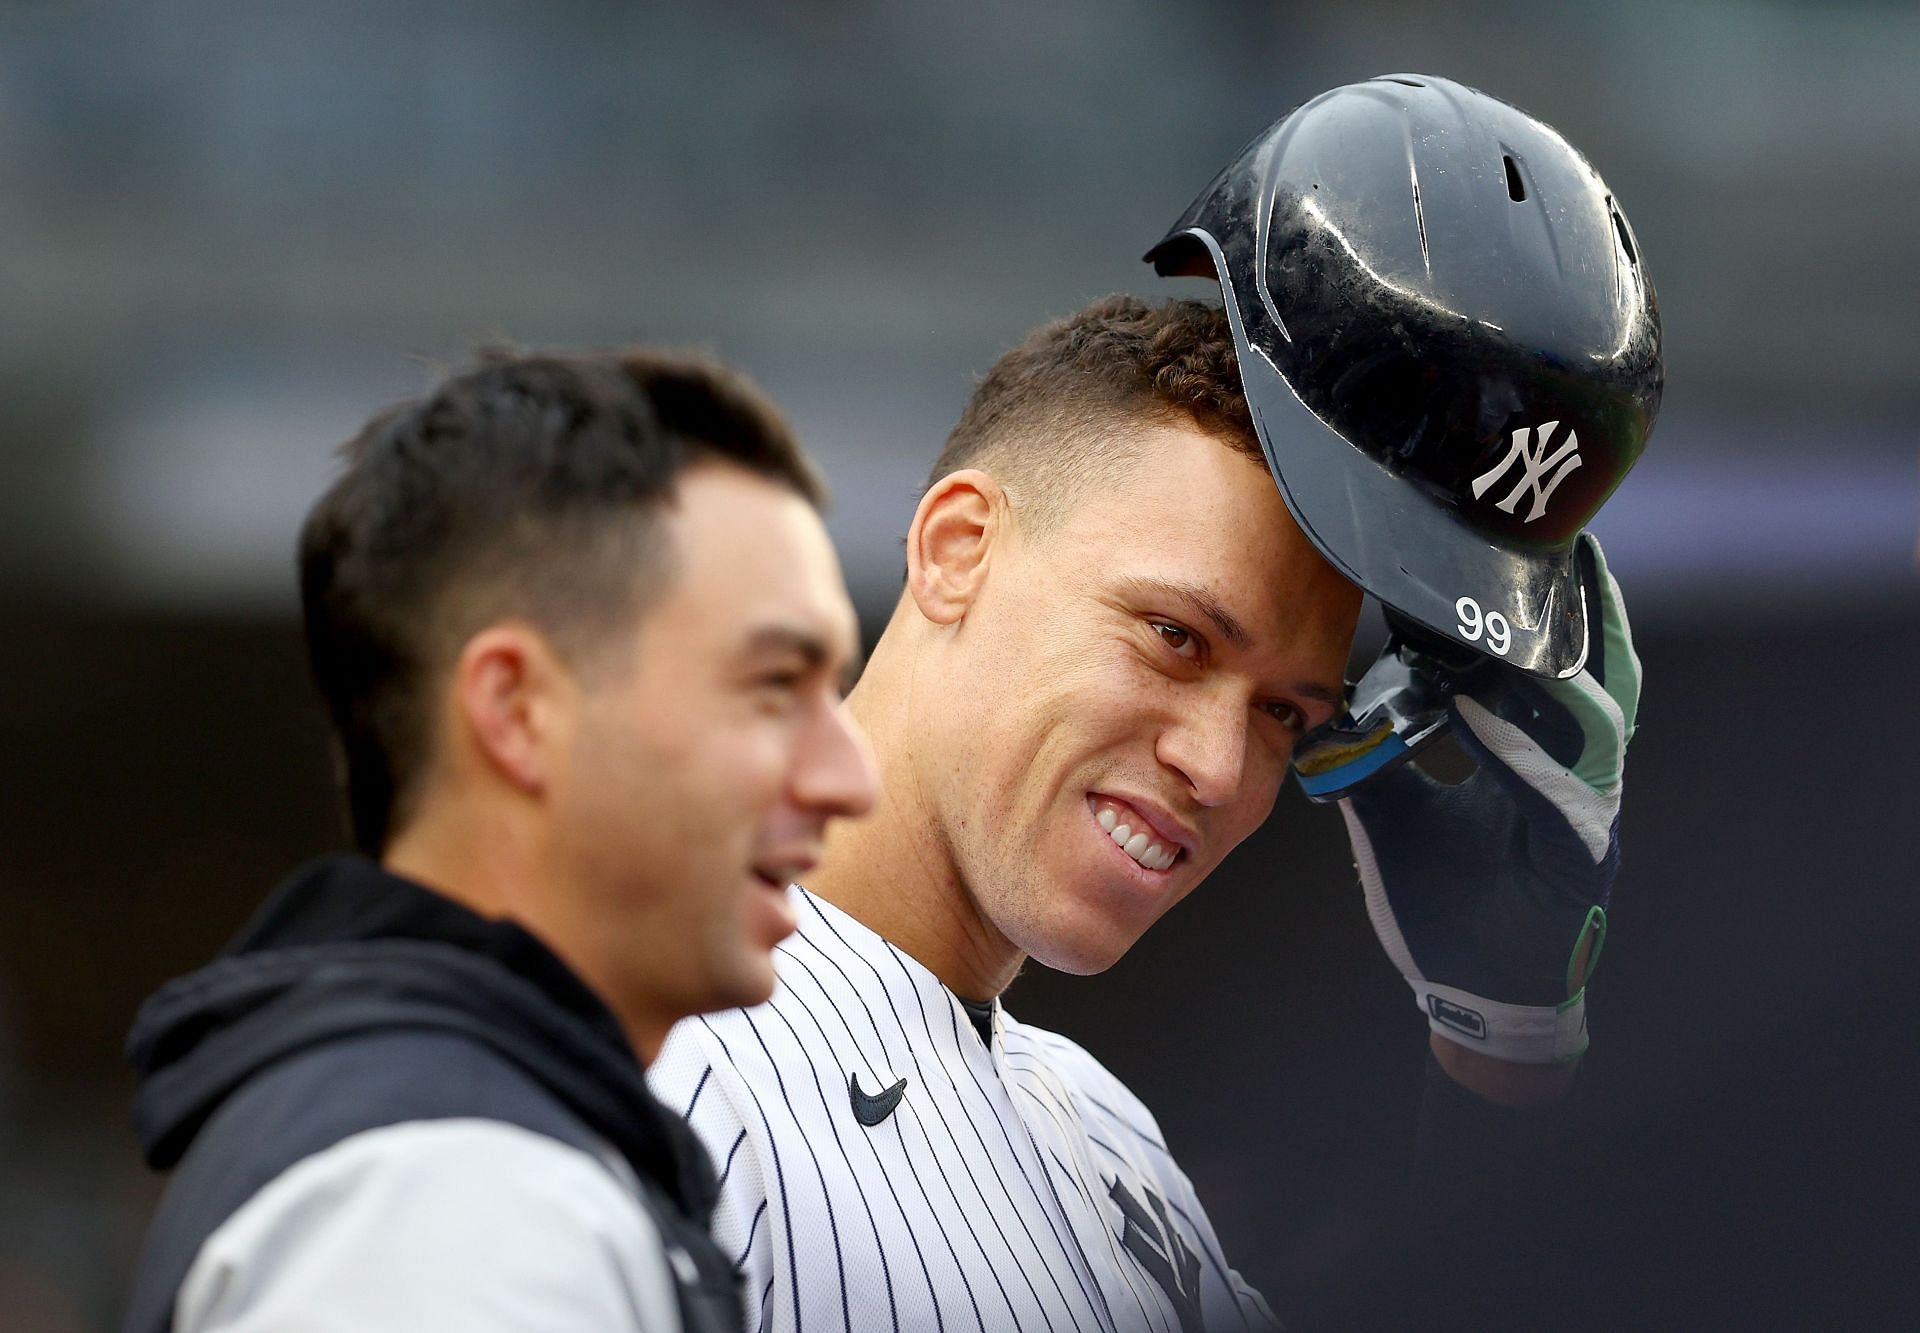 Aaron Judge remains at 61 after a disappointing game against the Orioles